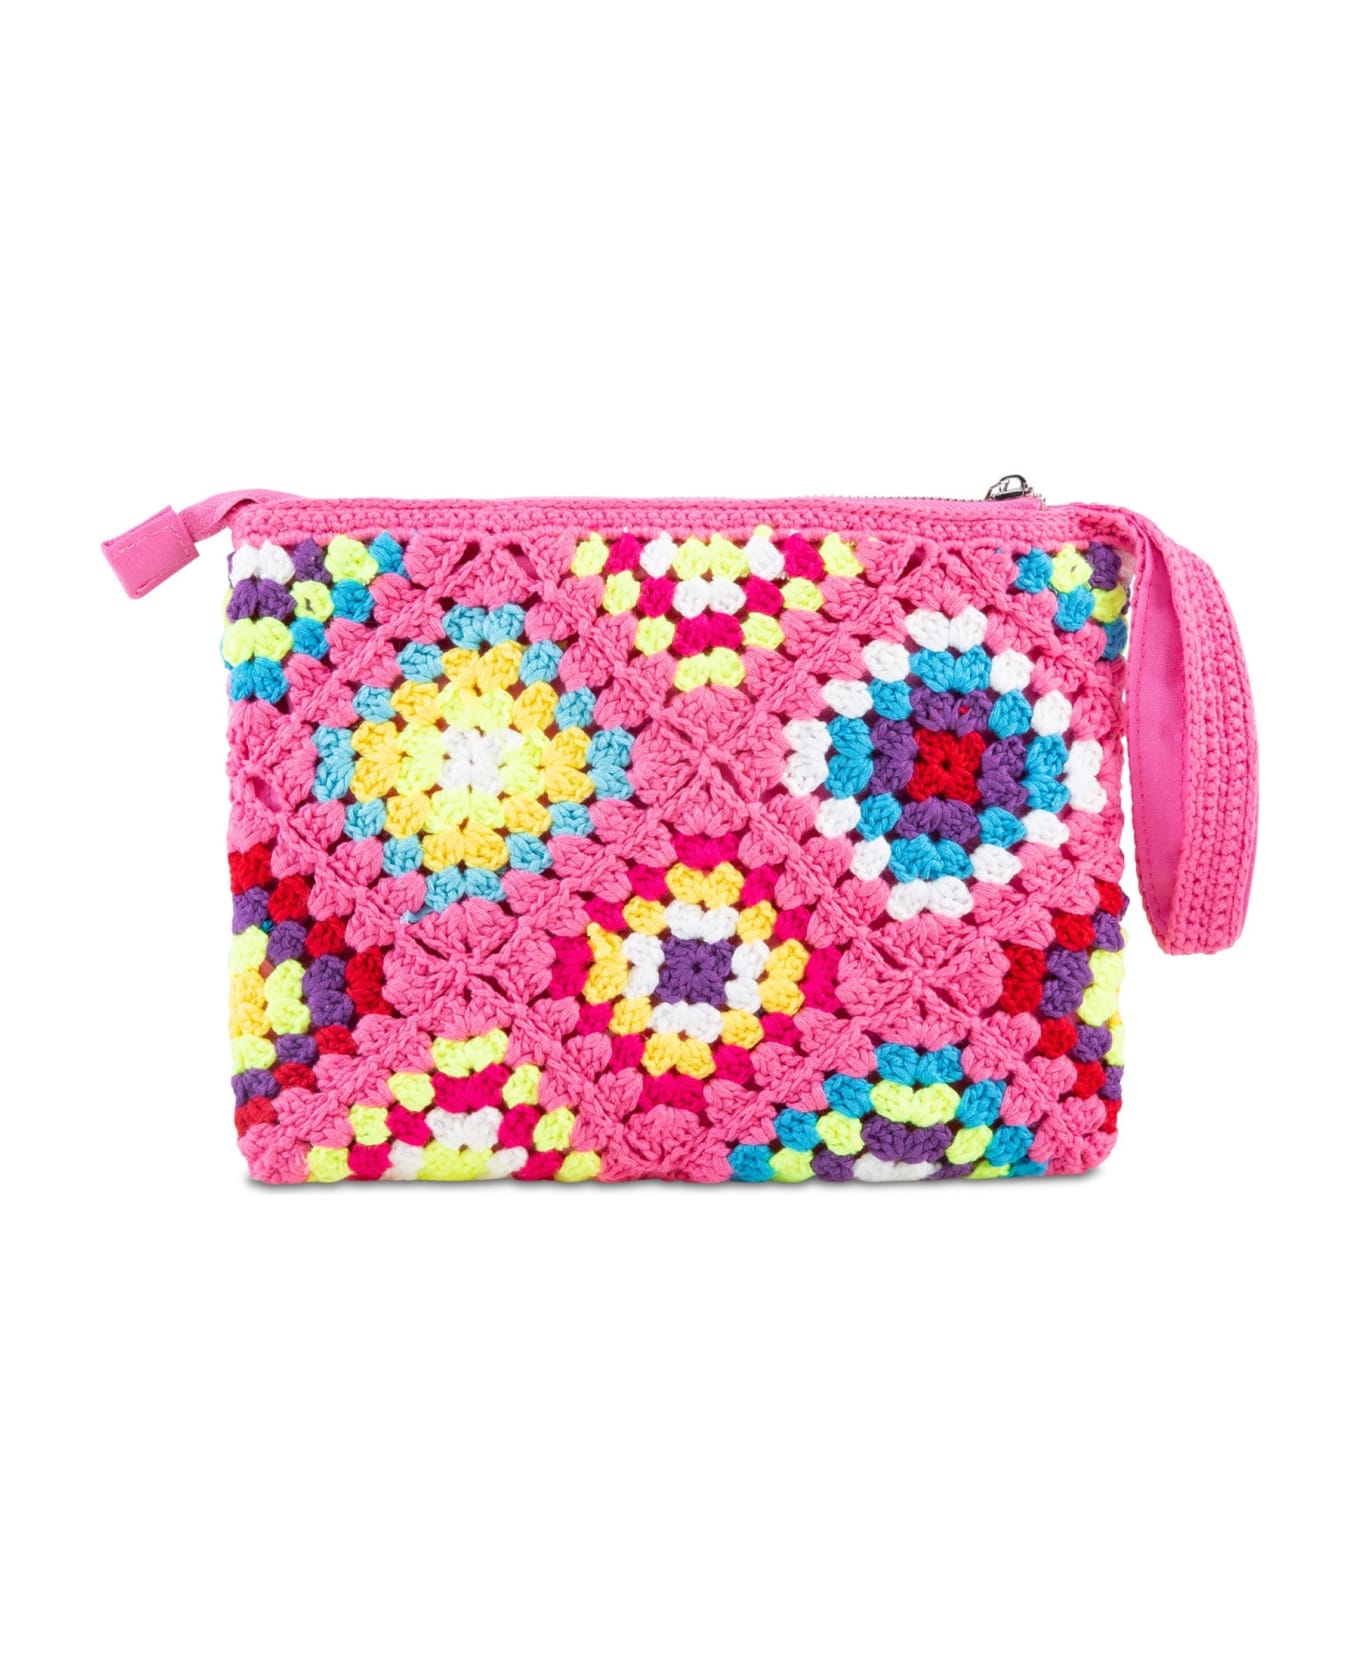 MC2 Saint Barth Parisienne Pink Crochet Pouch Bag With Saint Barth Embroidery - PINK